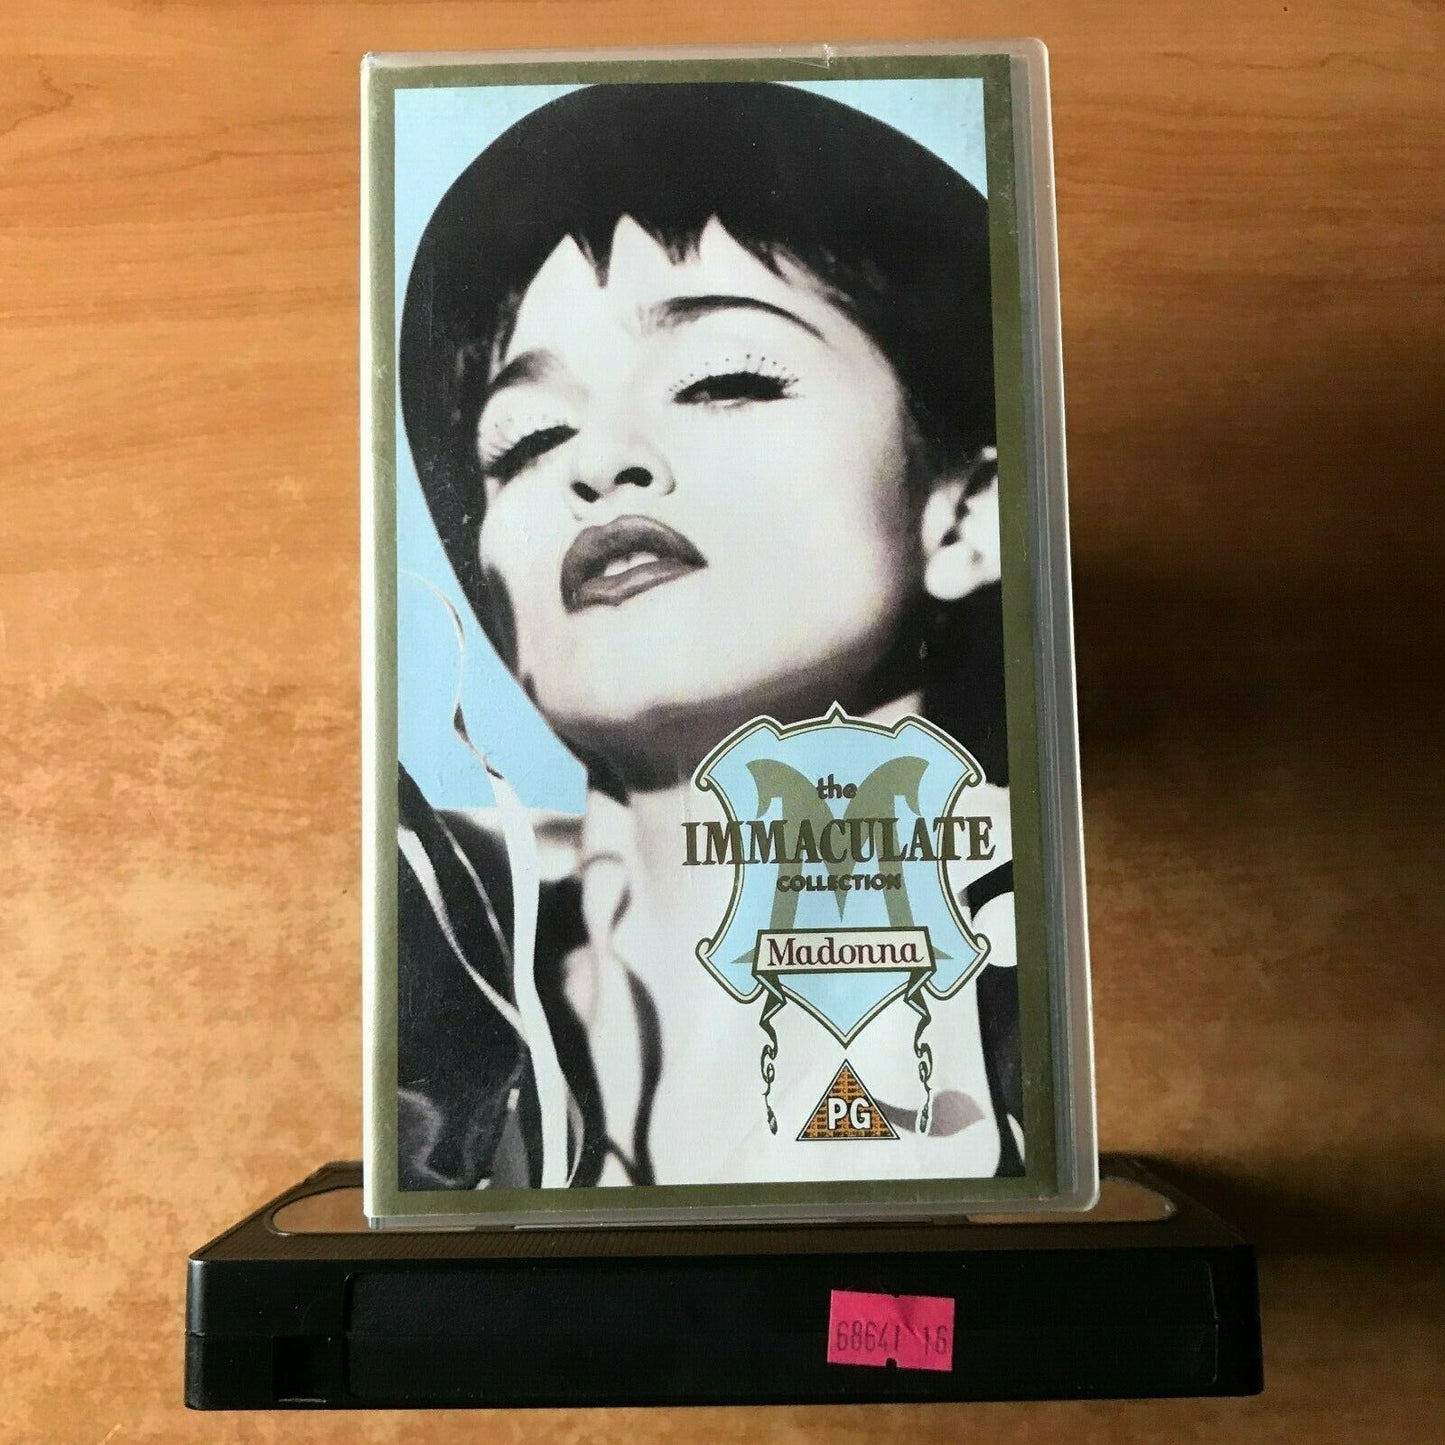 Madonna: The Immaculate Collection [Music Videos]: "Like A Virgin" - Pal VHS-